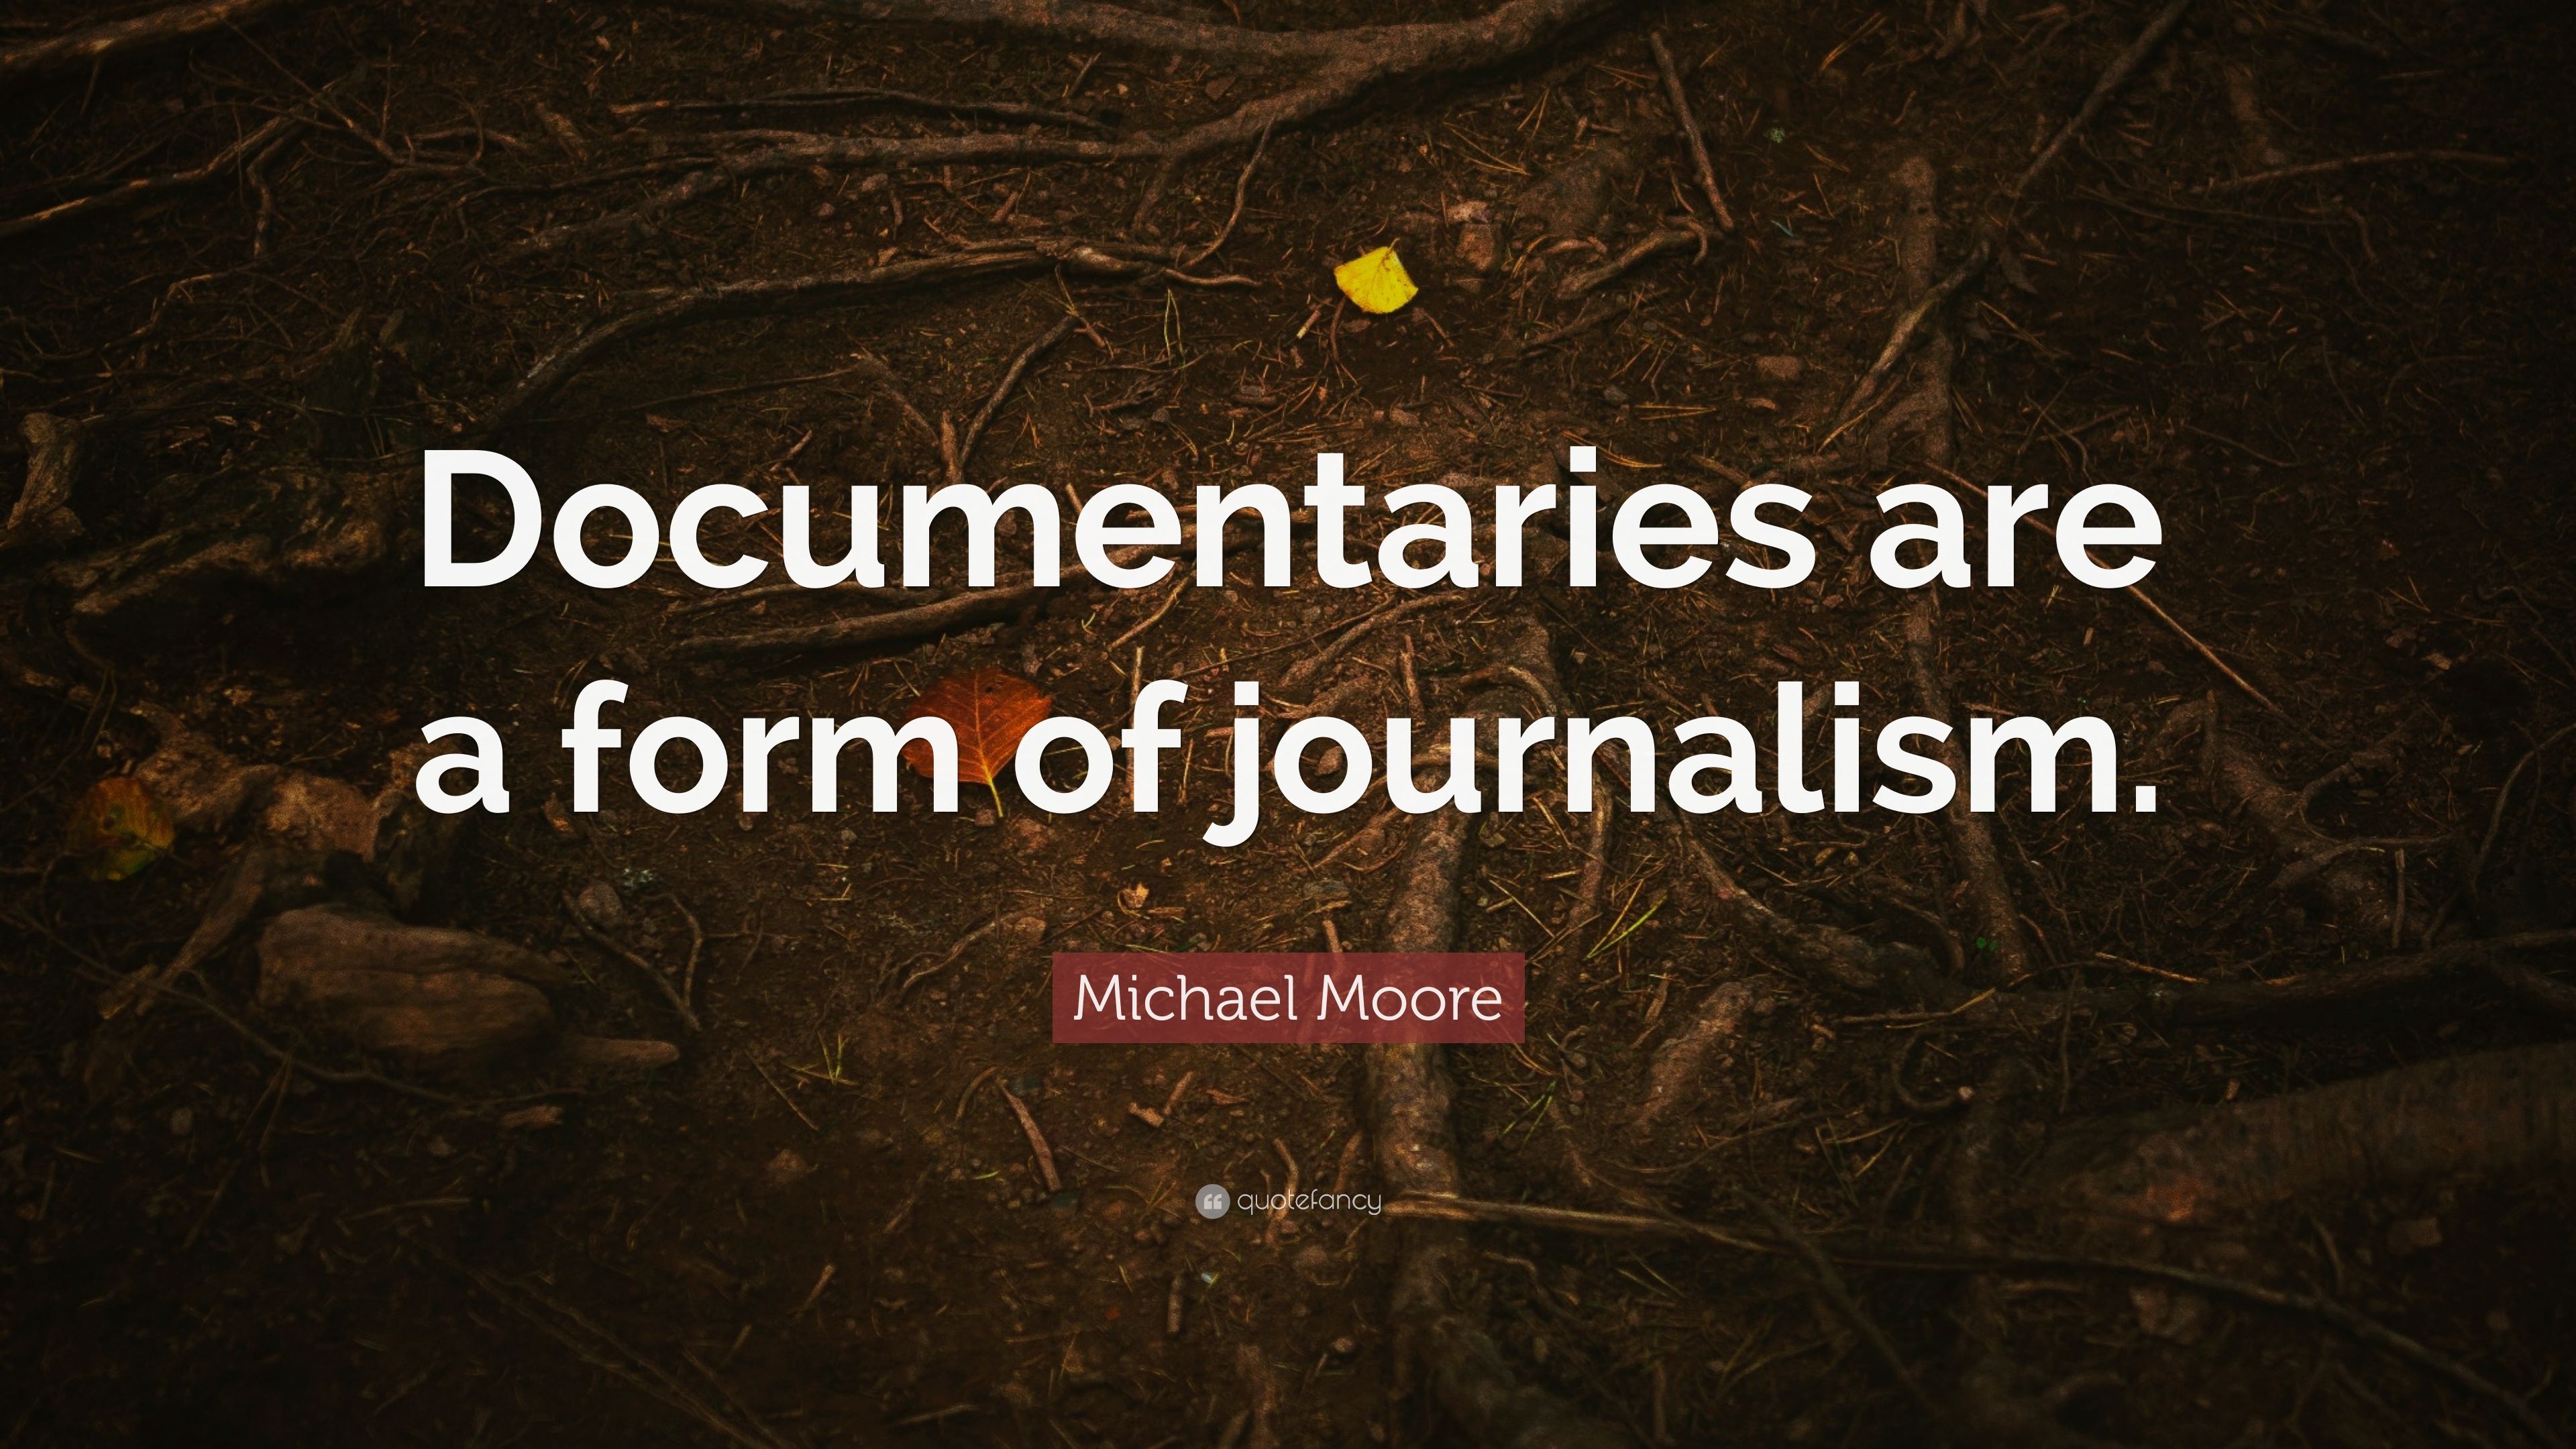 Michael Moore Quote: “Documentaries are a form of journalism.” (7 wallpaper)